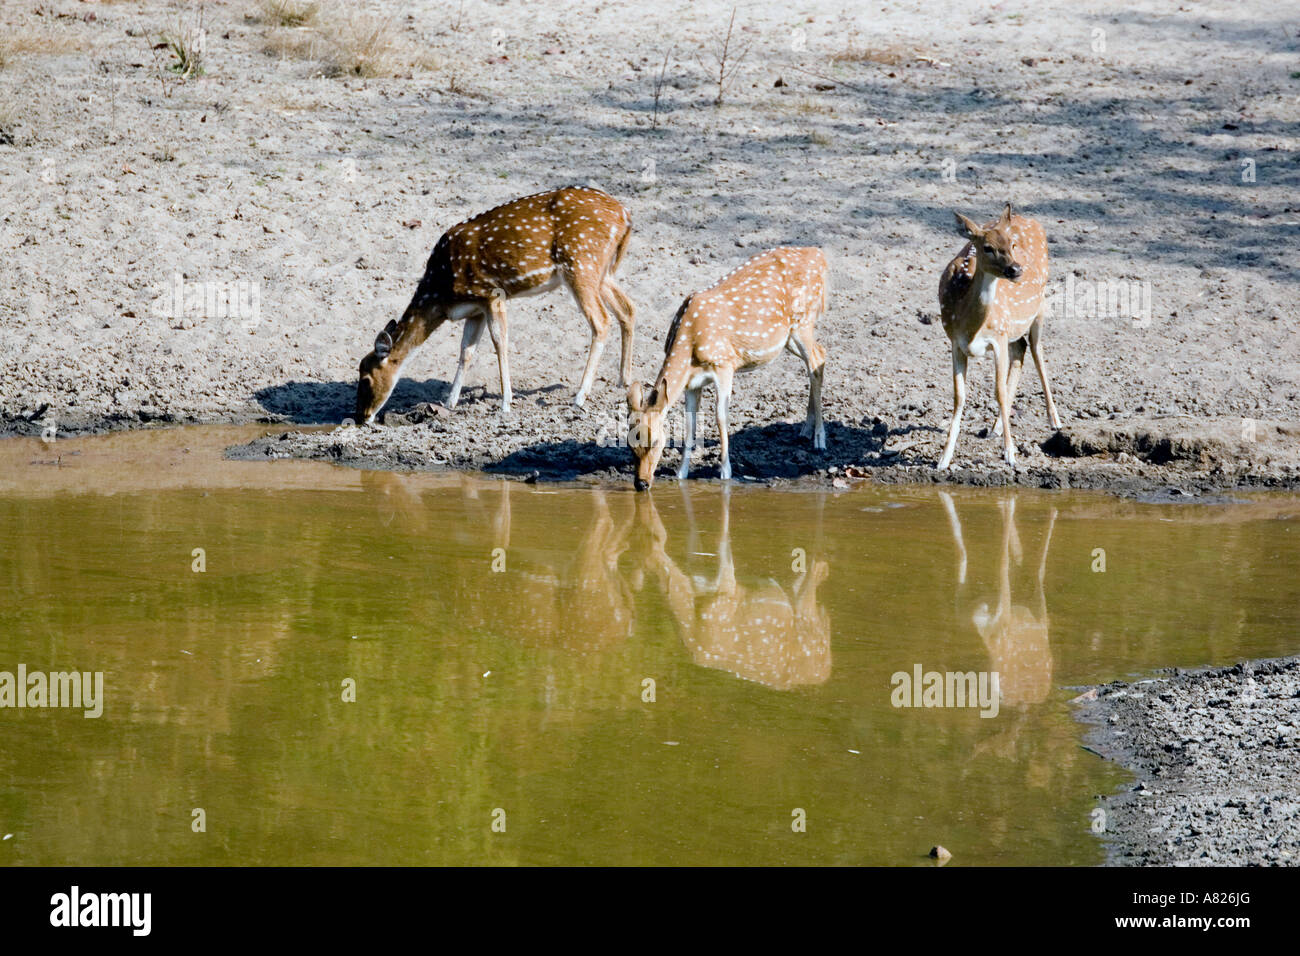 North India Bandavgarh National Park Local Caption Spotted Deer Stock Photo